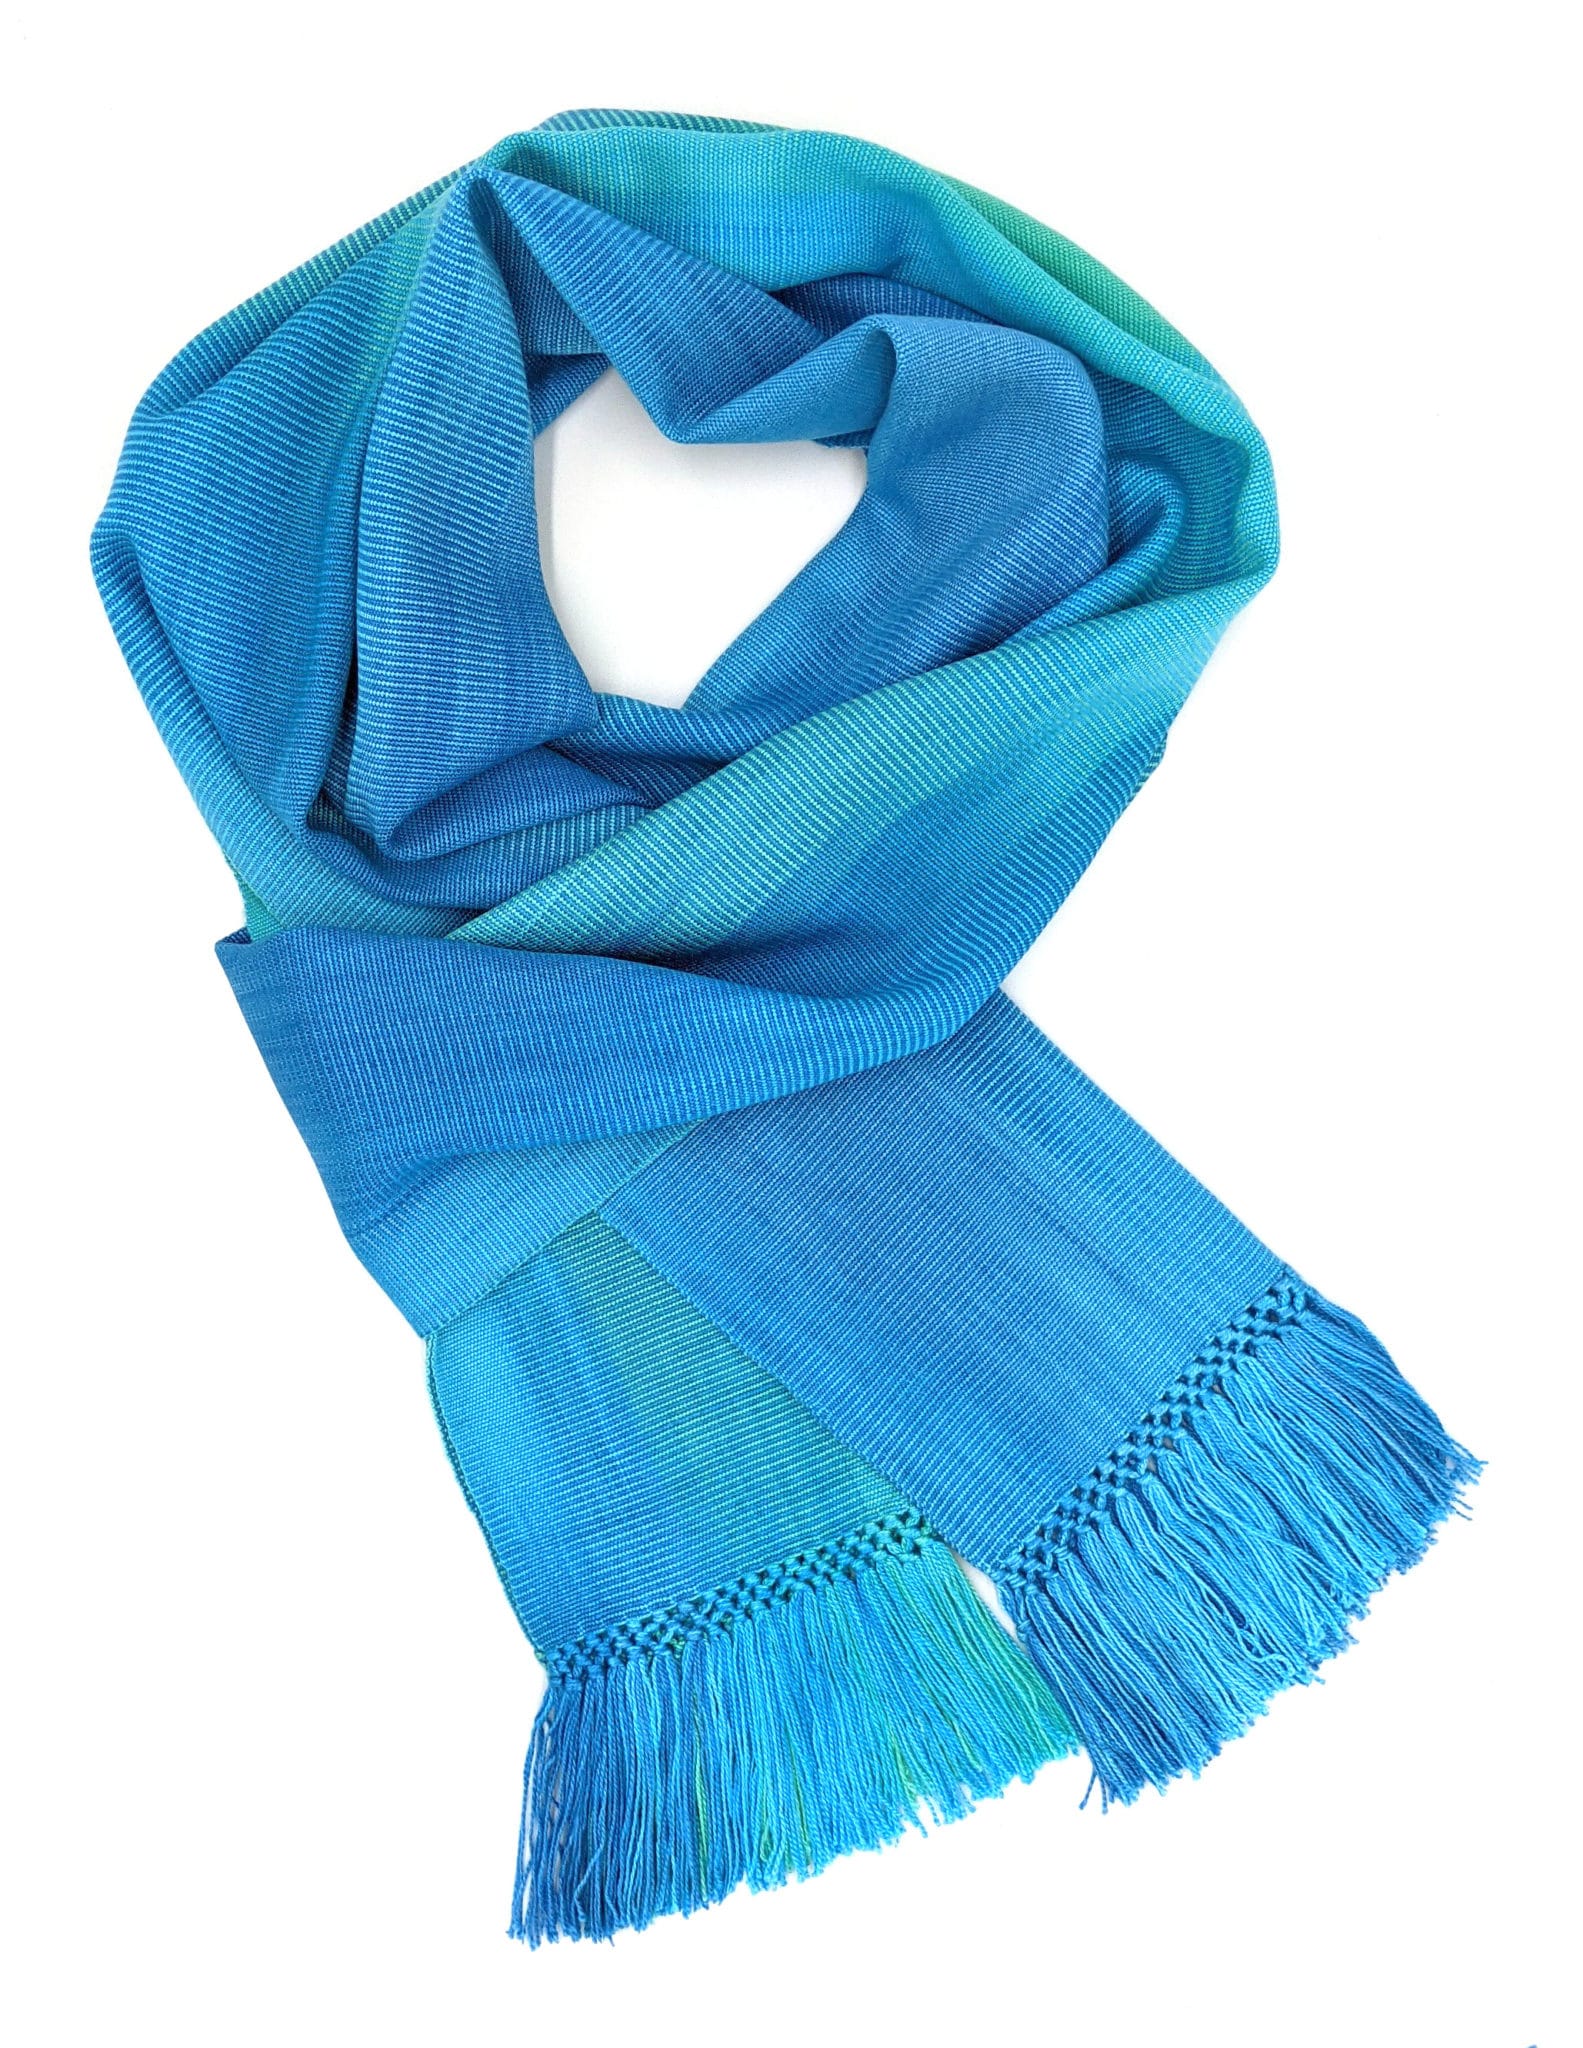 Turquoise, Celestial Blues - Lightweight Bamboo Handwoven Scarf 8 x 68